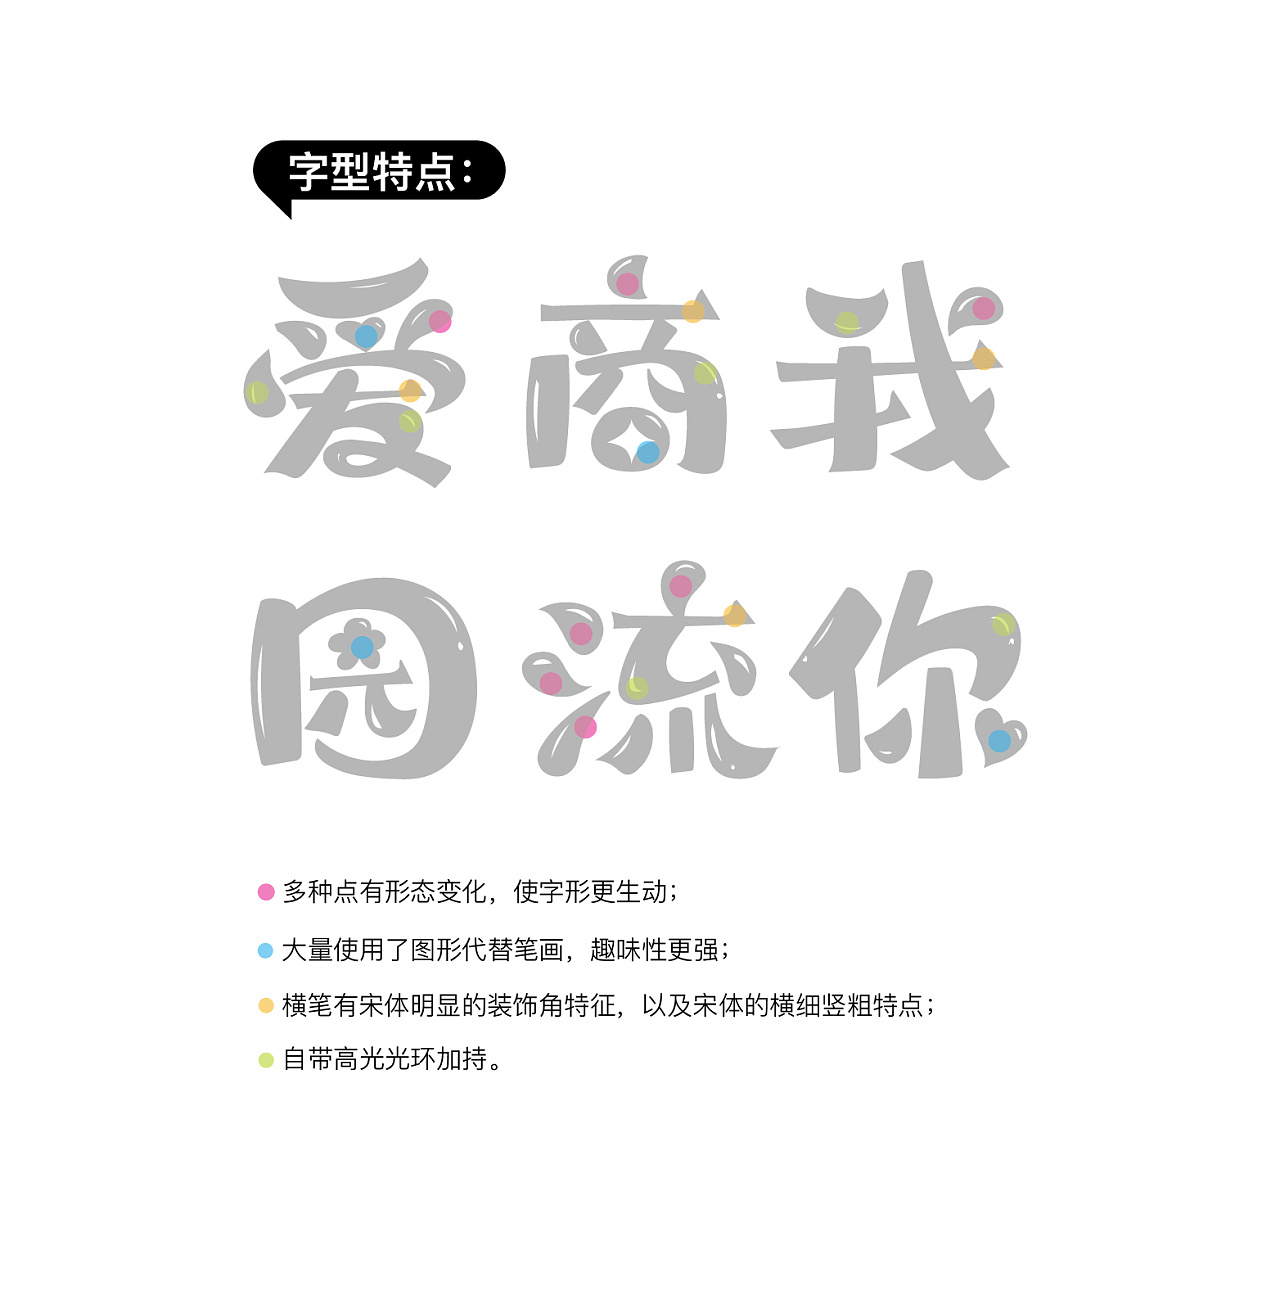 Chinese Creative Font Design-Funny Handwritten Song Style Online, Unlimited Full Media Commercial Edition